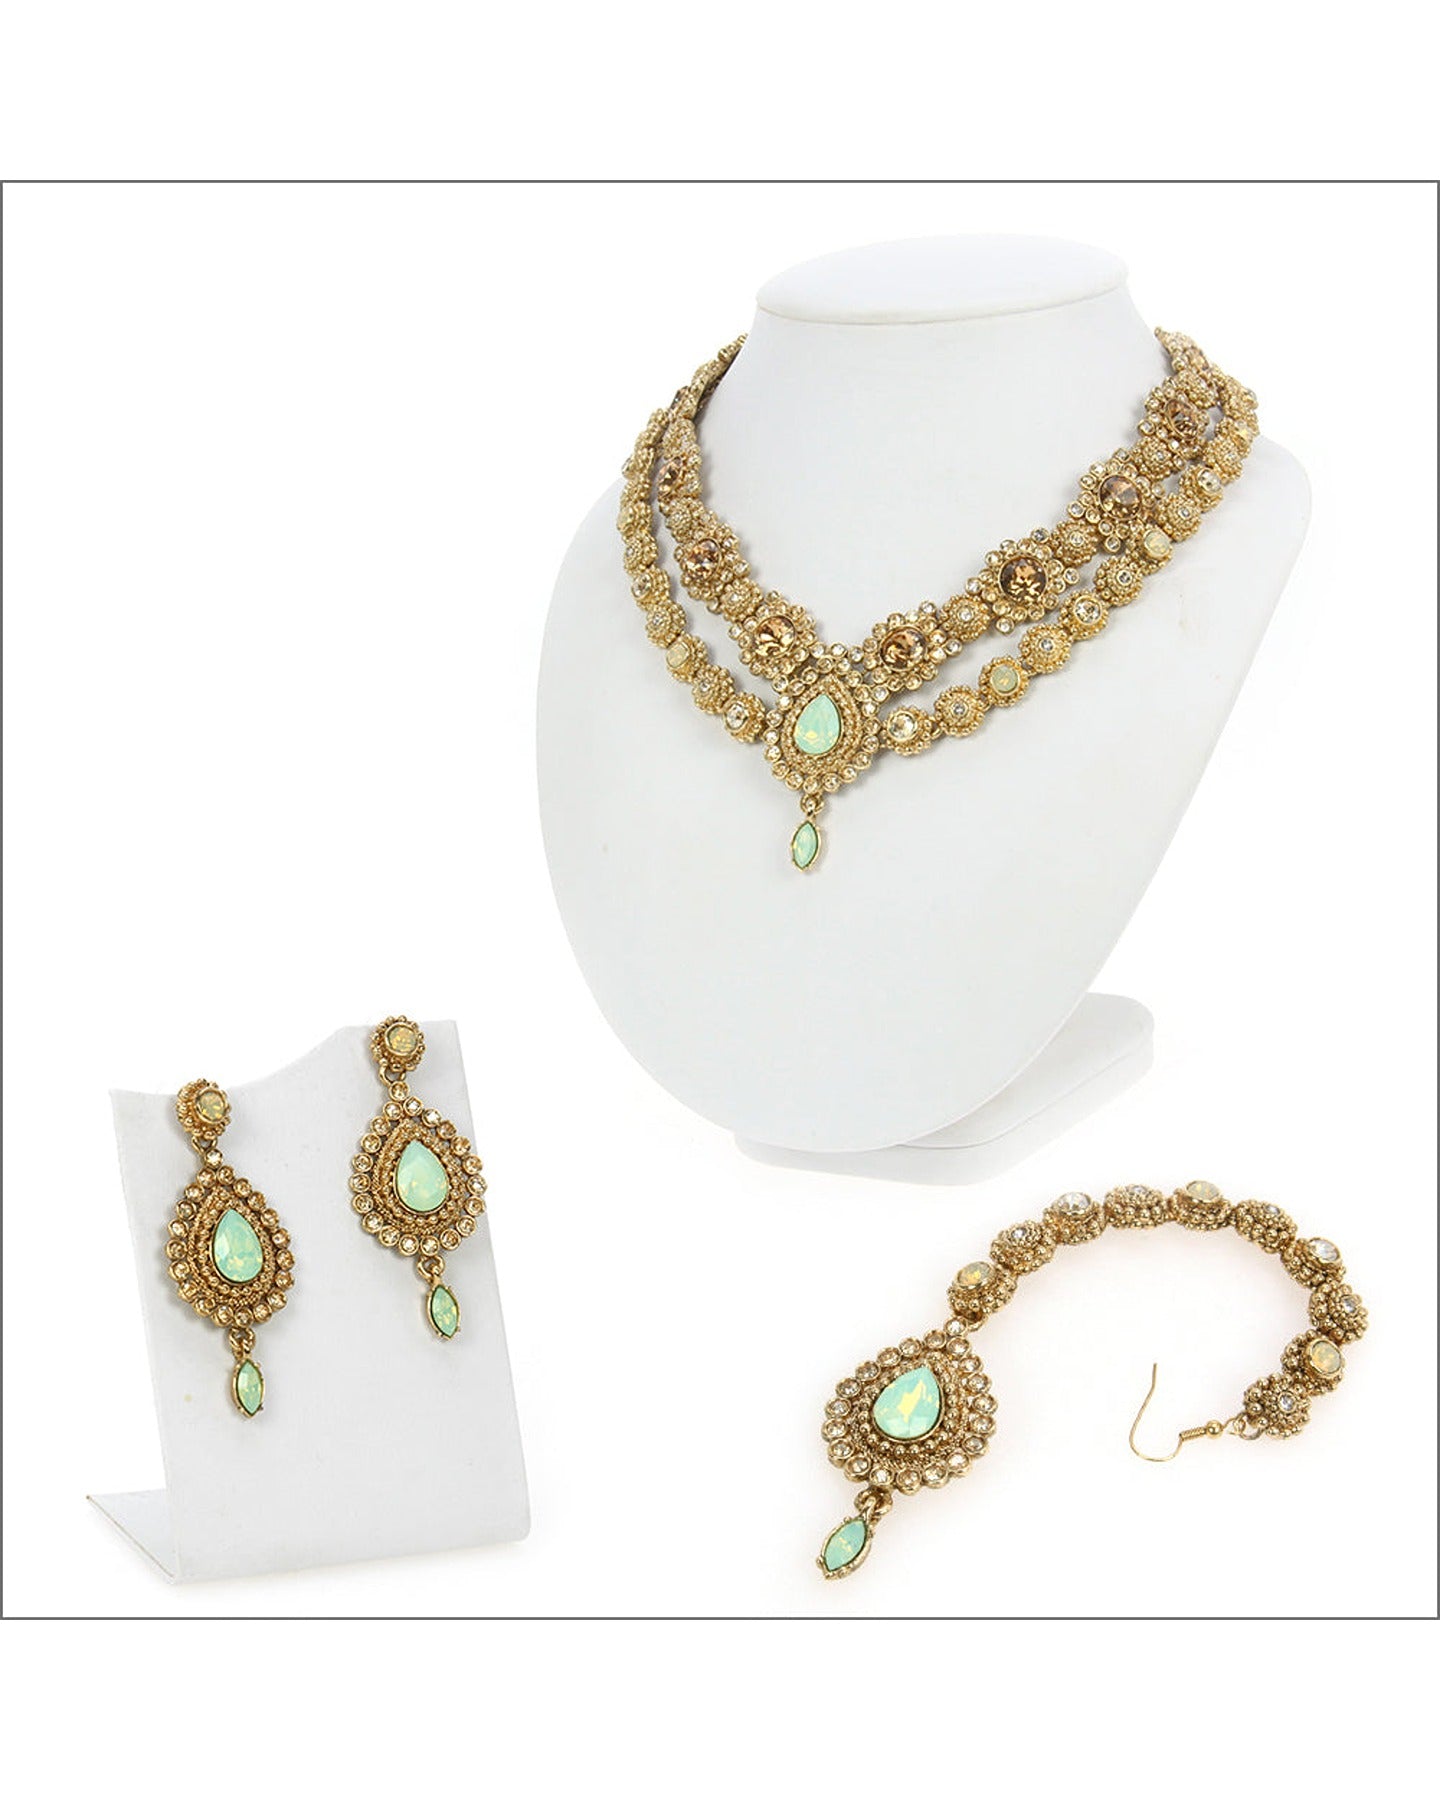 Antique Gold Jewelry with Chrysolite Opal and Crystal Golden Shadow Stones